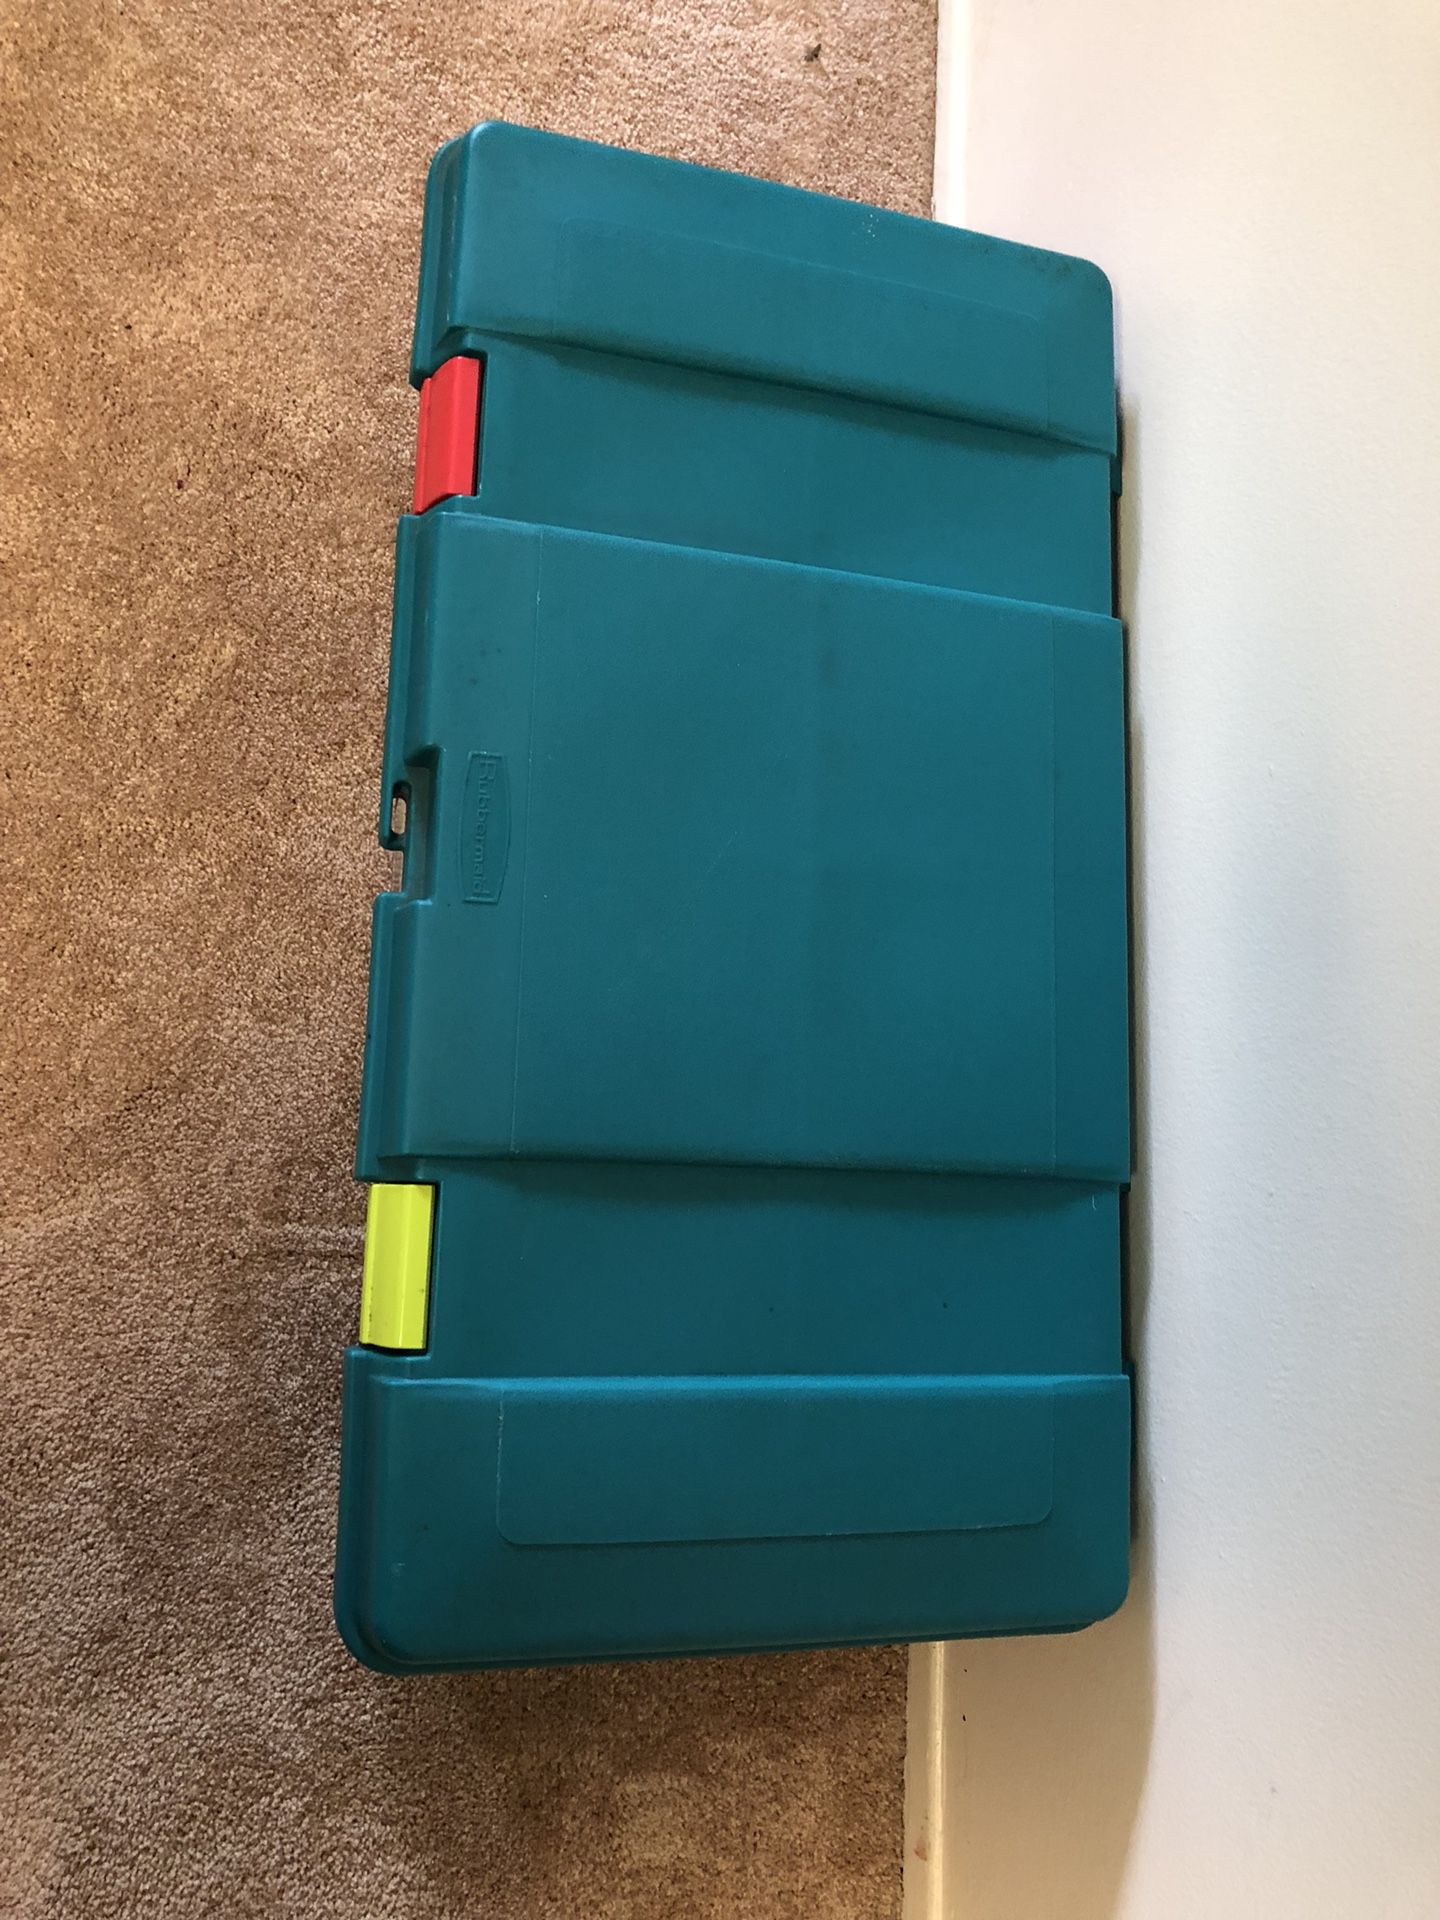 Rubbermaid Storage Container With Lids 36 Pieces Teal for Sale in Altamonte  Springs, FL - OfferUp